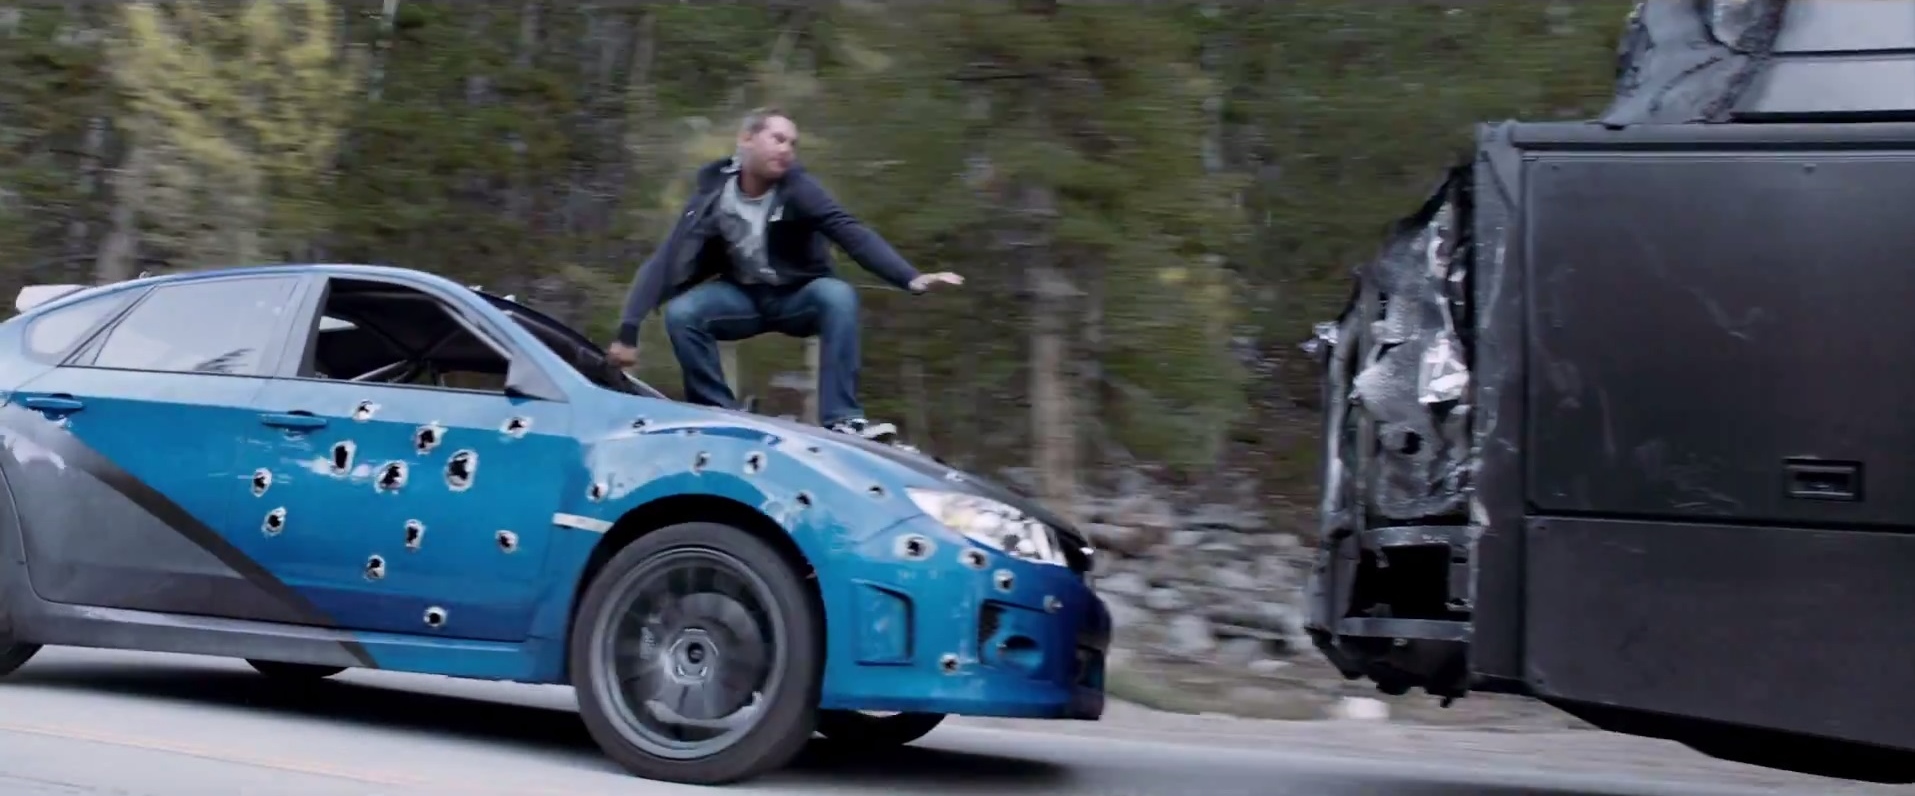 Fast & Furious 7 trailer released and it's epic!